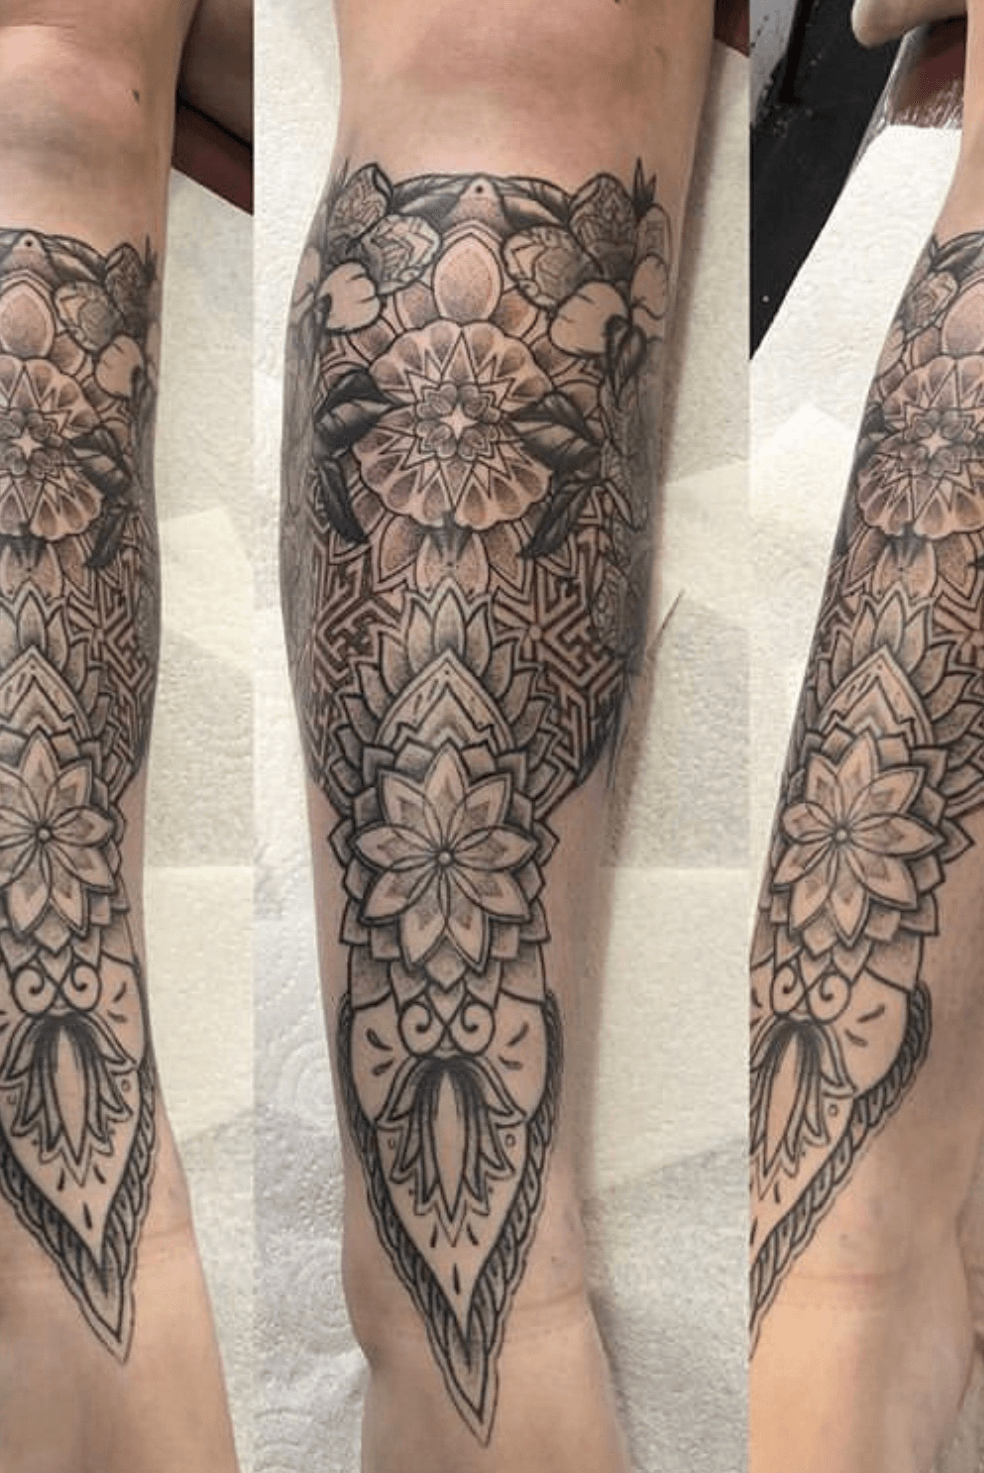 Tattoo uploaded by Sophie Sparrow • Ongoing dot work leg sleeve